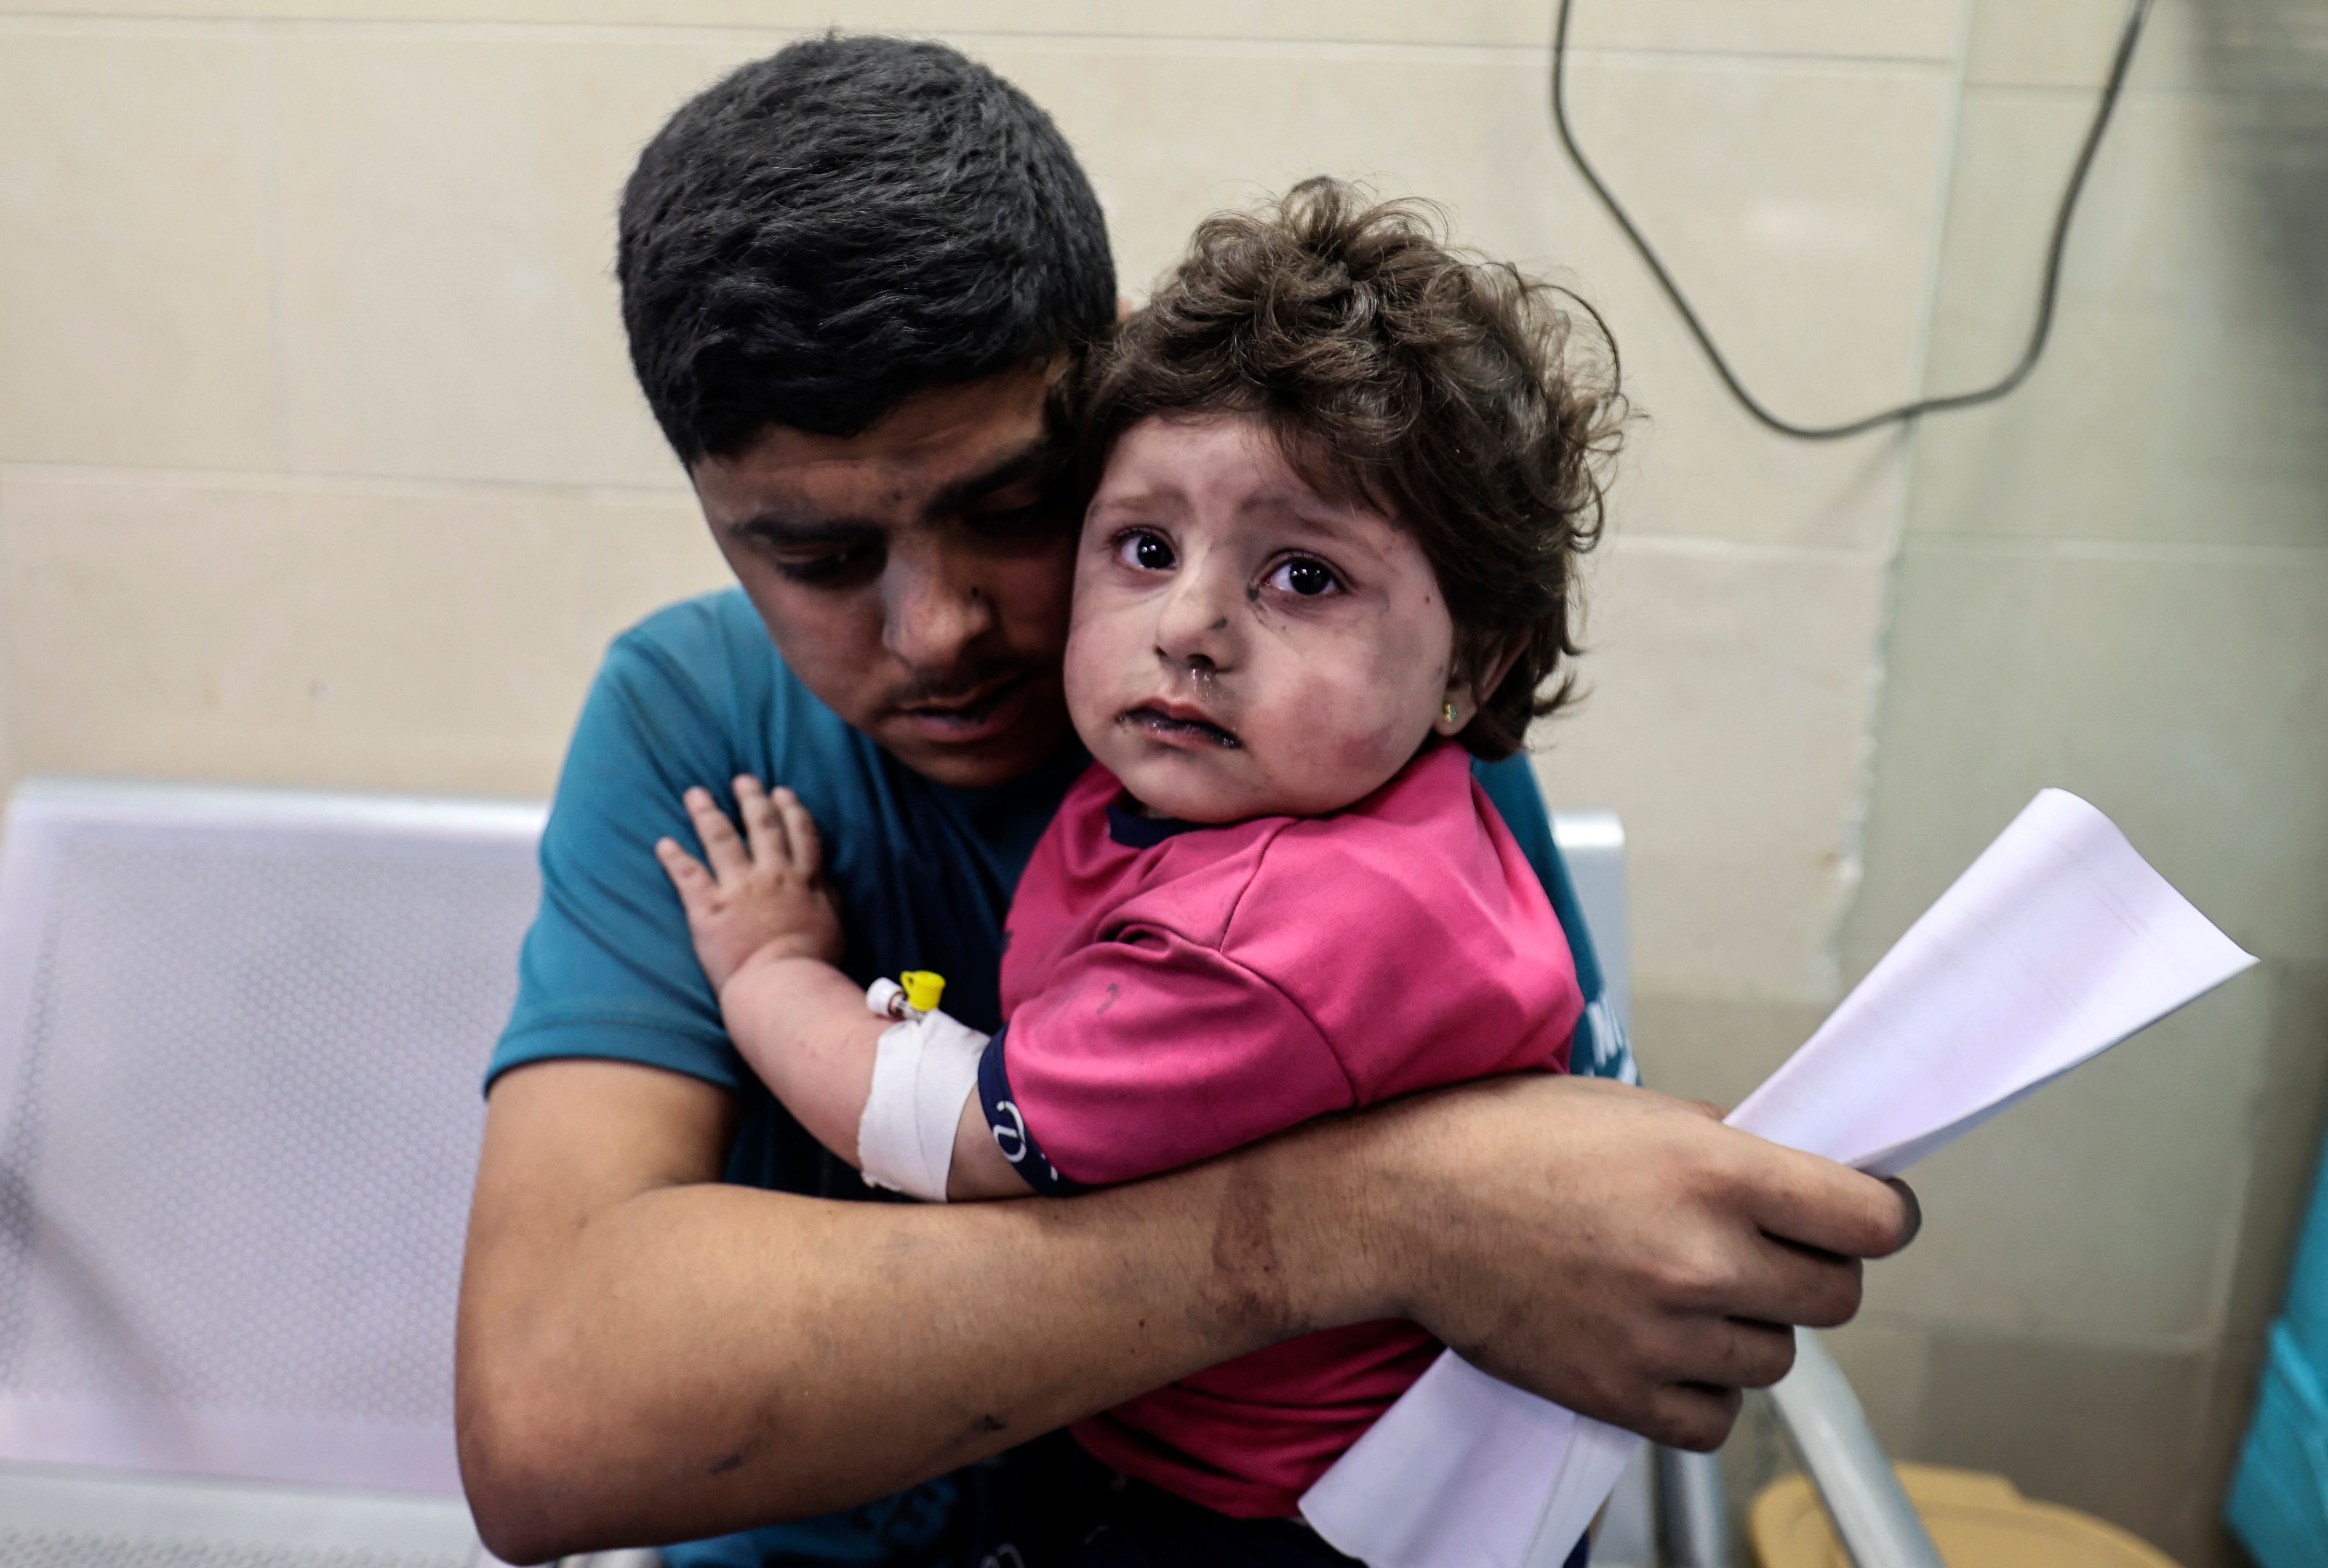 A Palestinian man holds an injured girl awaiting medical care at al-Shifa hospital, after an Israeli air strike in Gaza city, on May 11